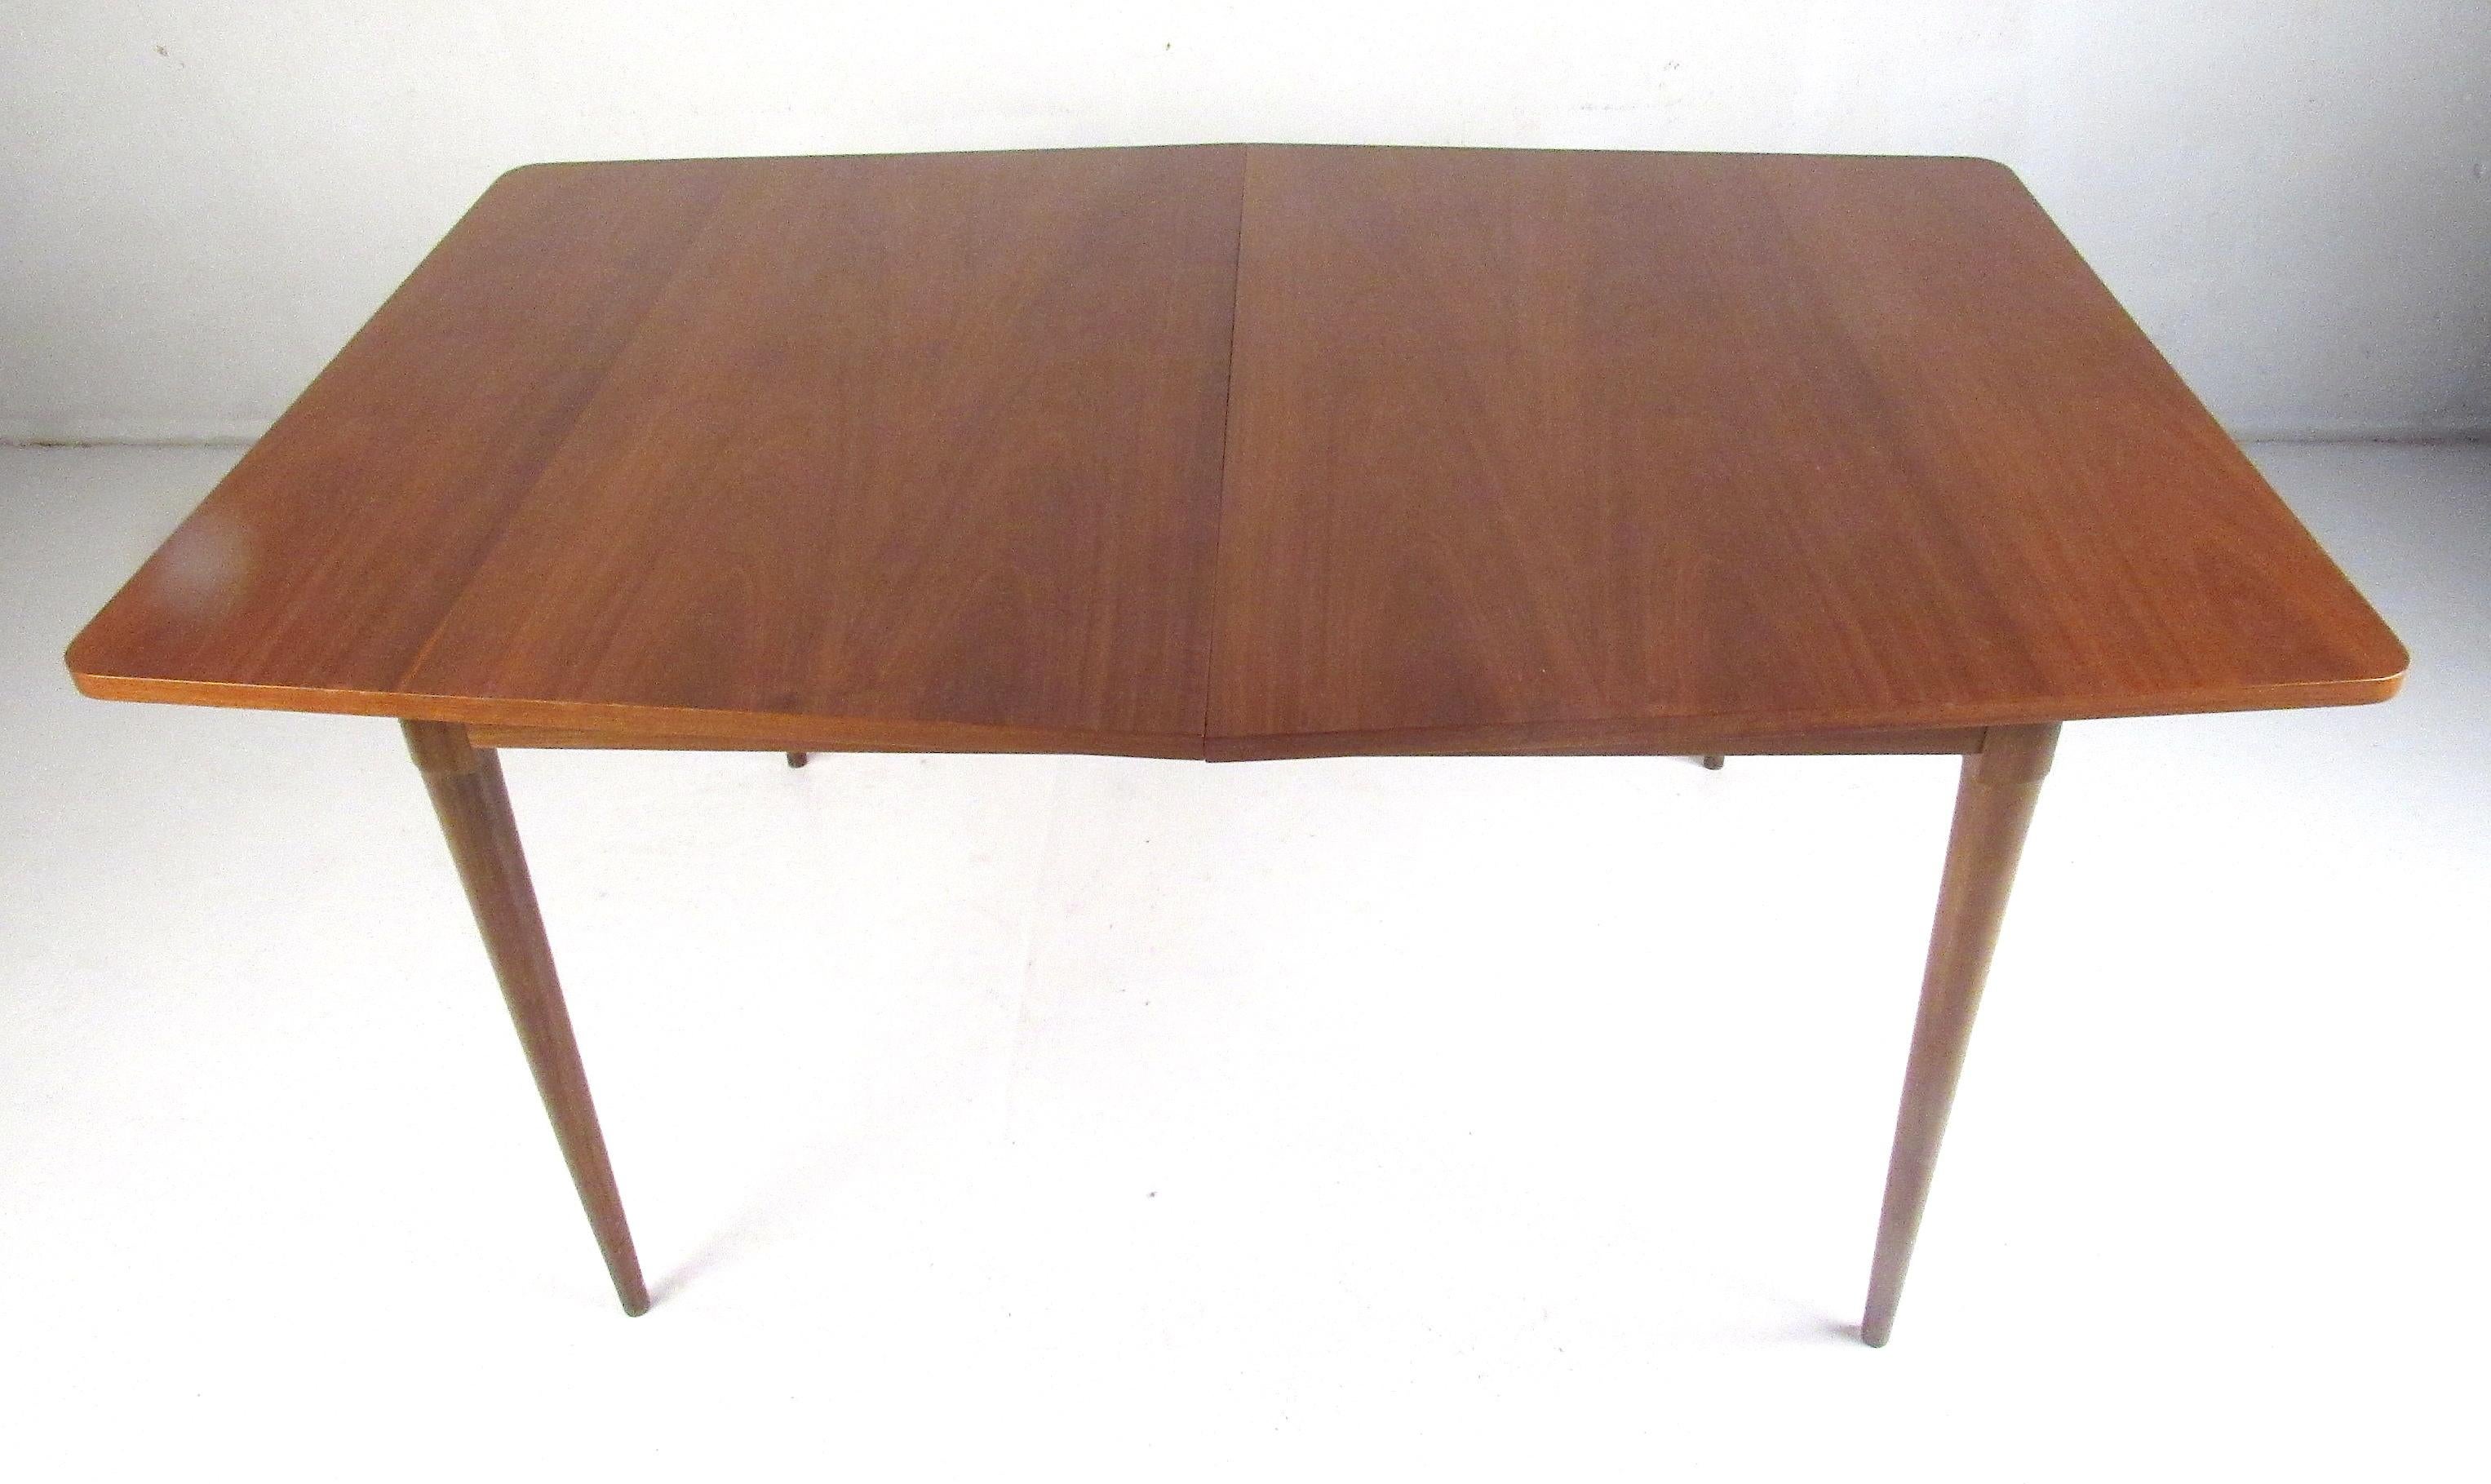 Clean lines and simple detailing define this Mid-Century Modern walnut dining table. The table expands from 60